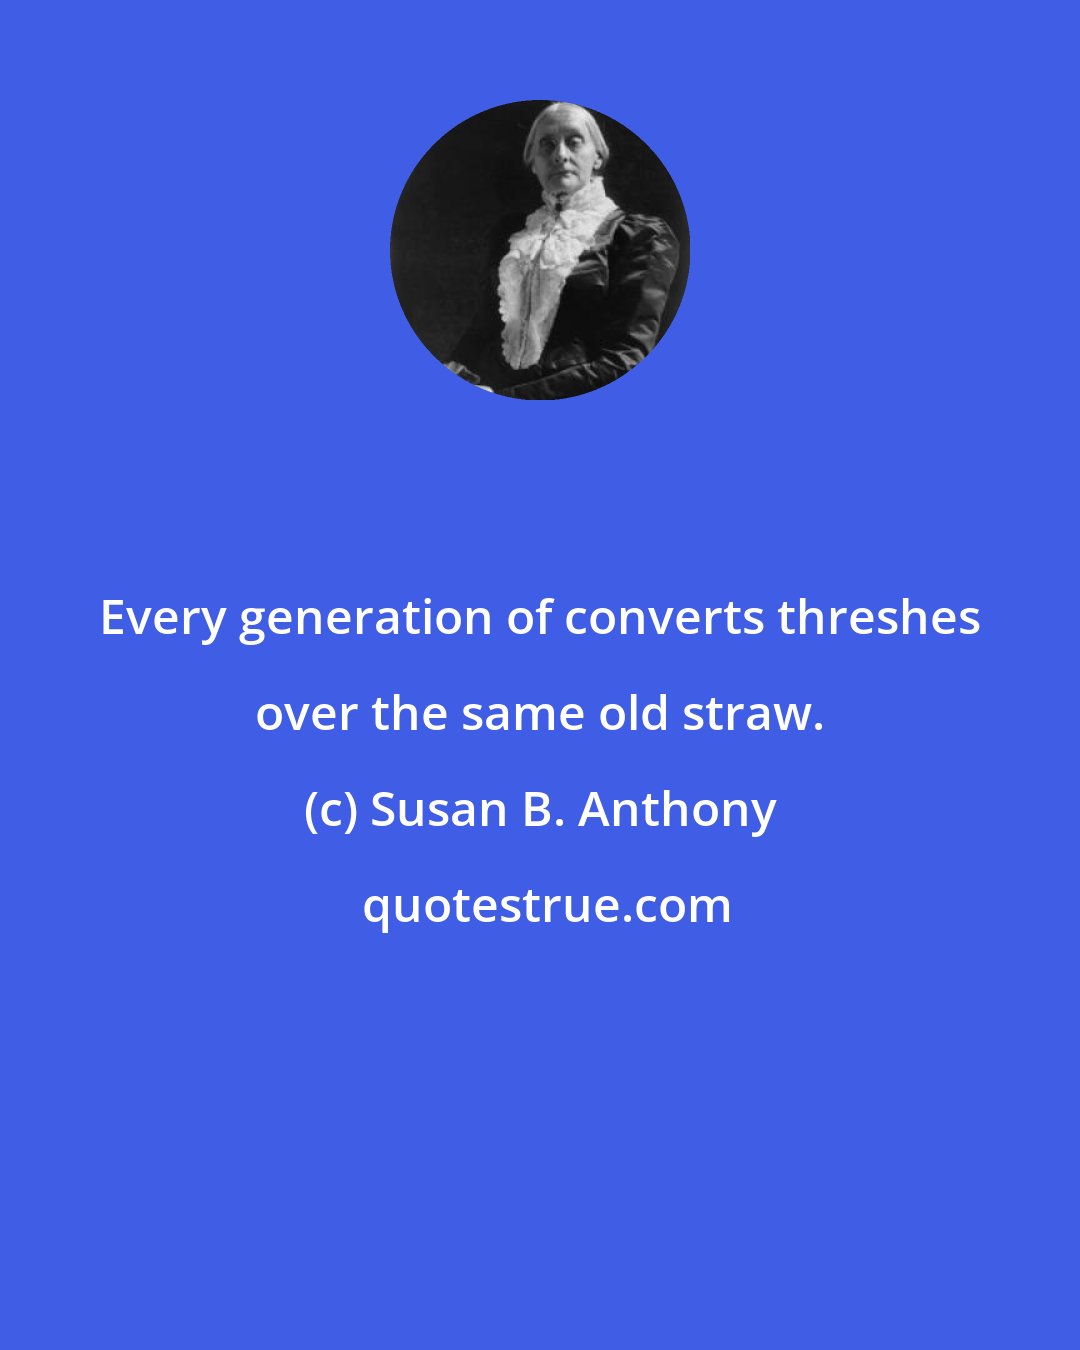 Susan B. Anthony: Every generation of converts threshes over the same old straw.